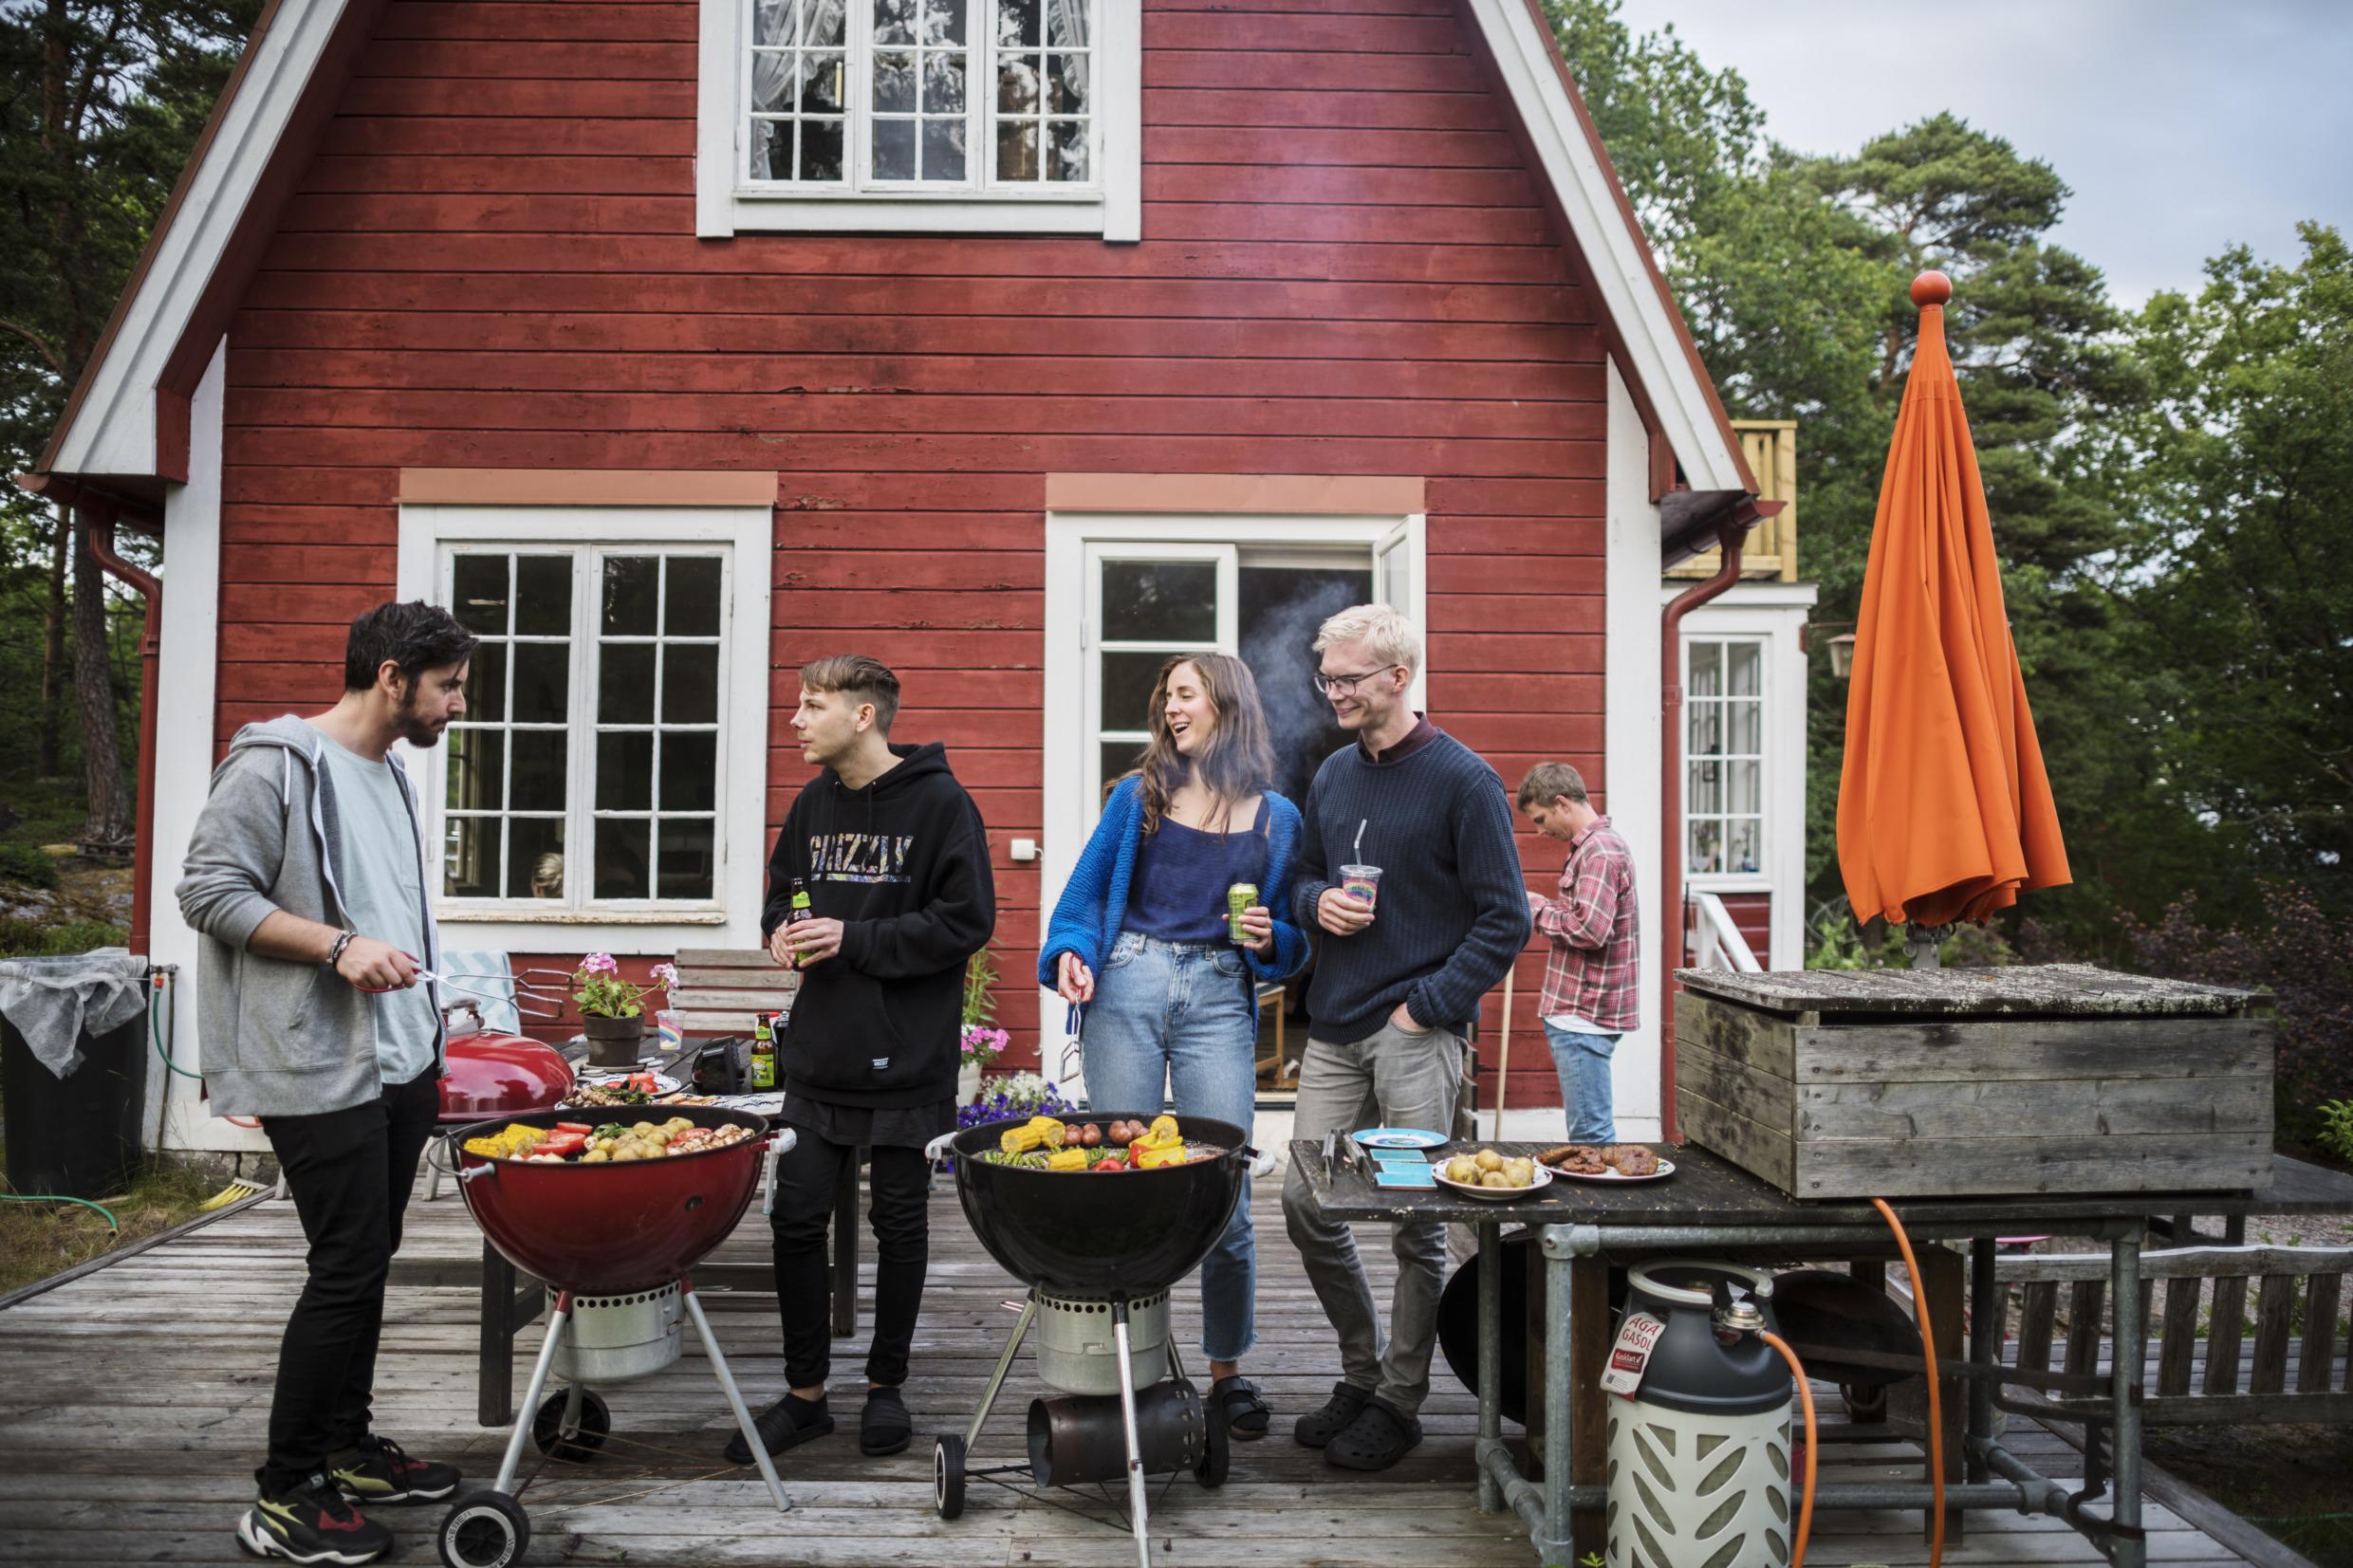 A group of people on a terrace are drinking and preparing food on two outdoor grills.